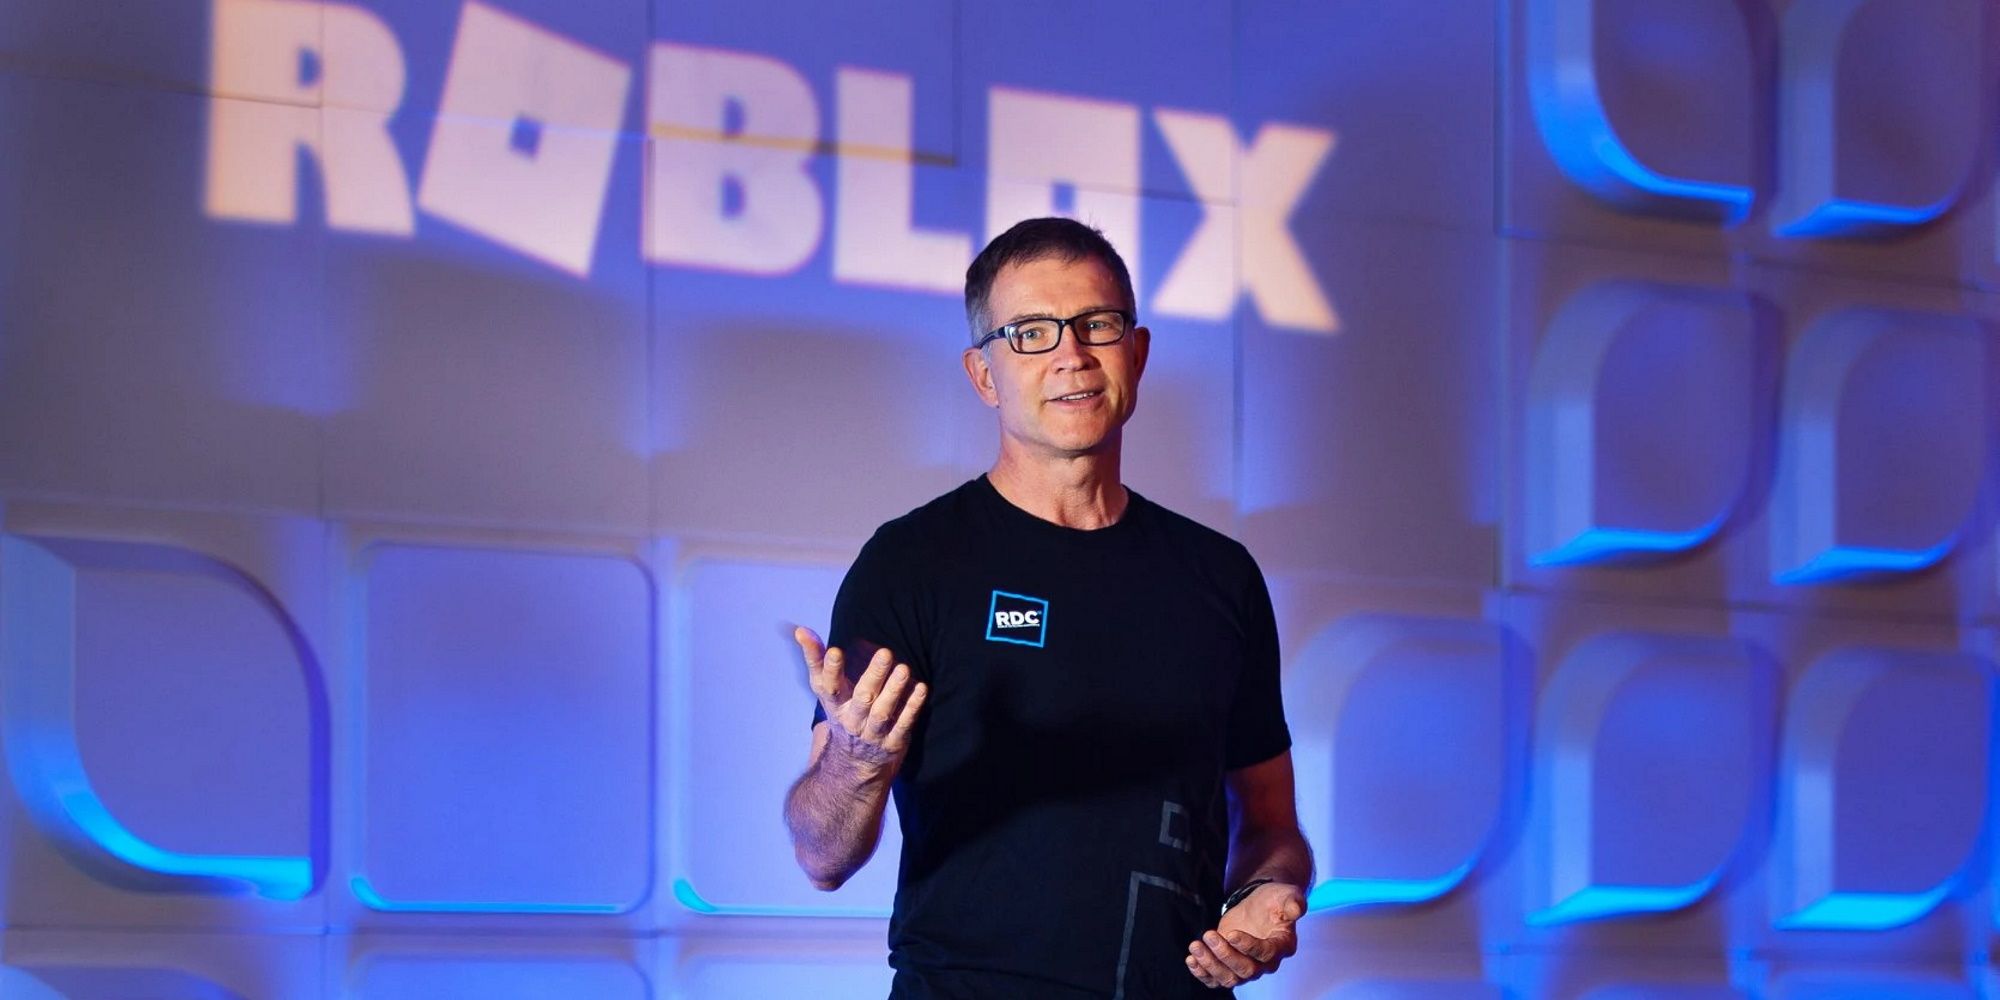 The annual payment to the founder of Roblox may amount to $ 233 million. He  will get it if the company's shares rise